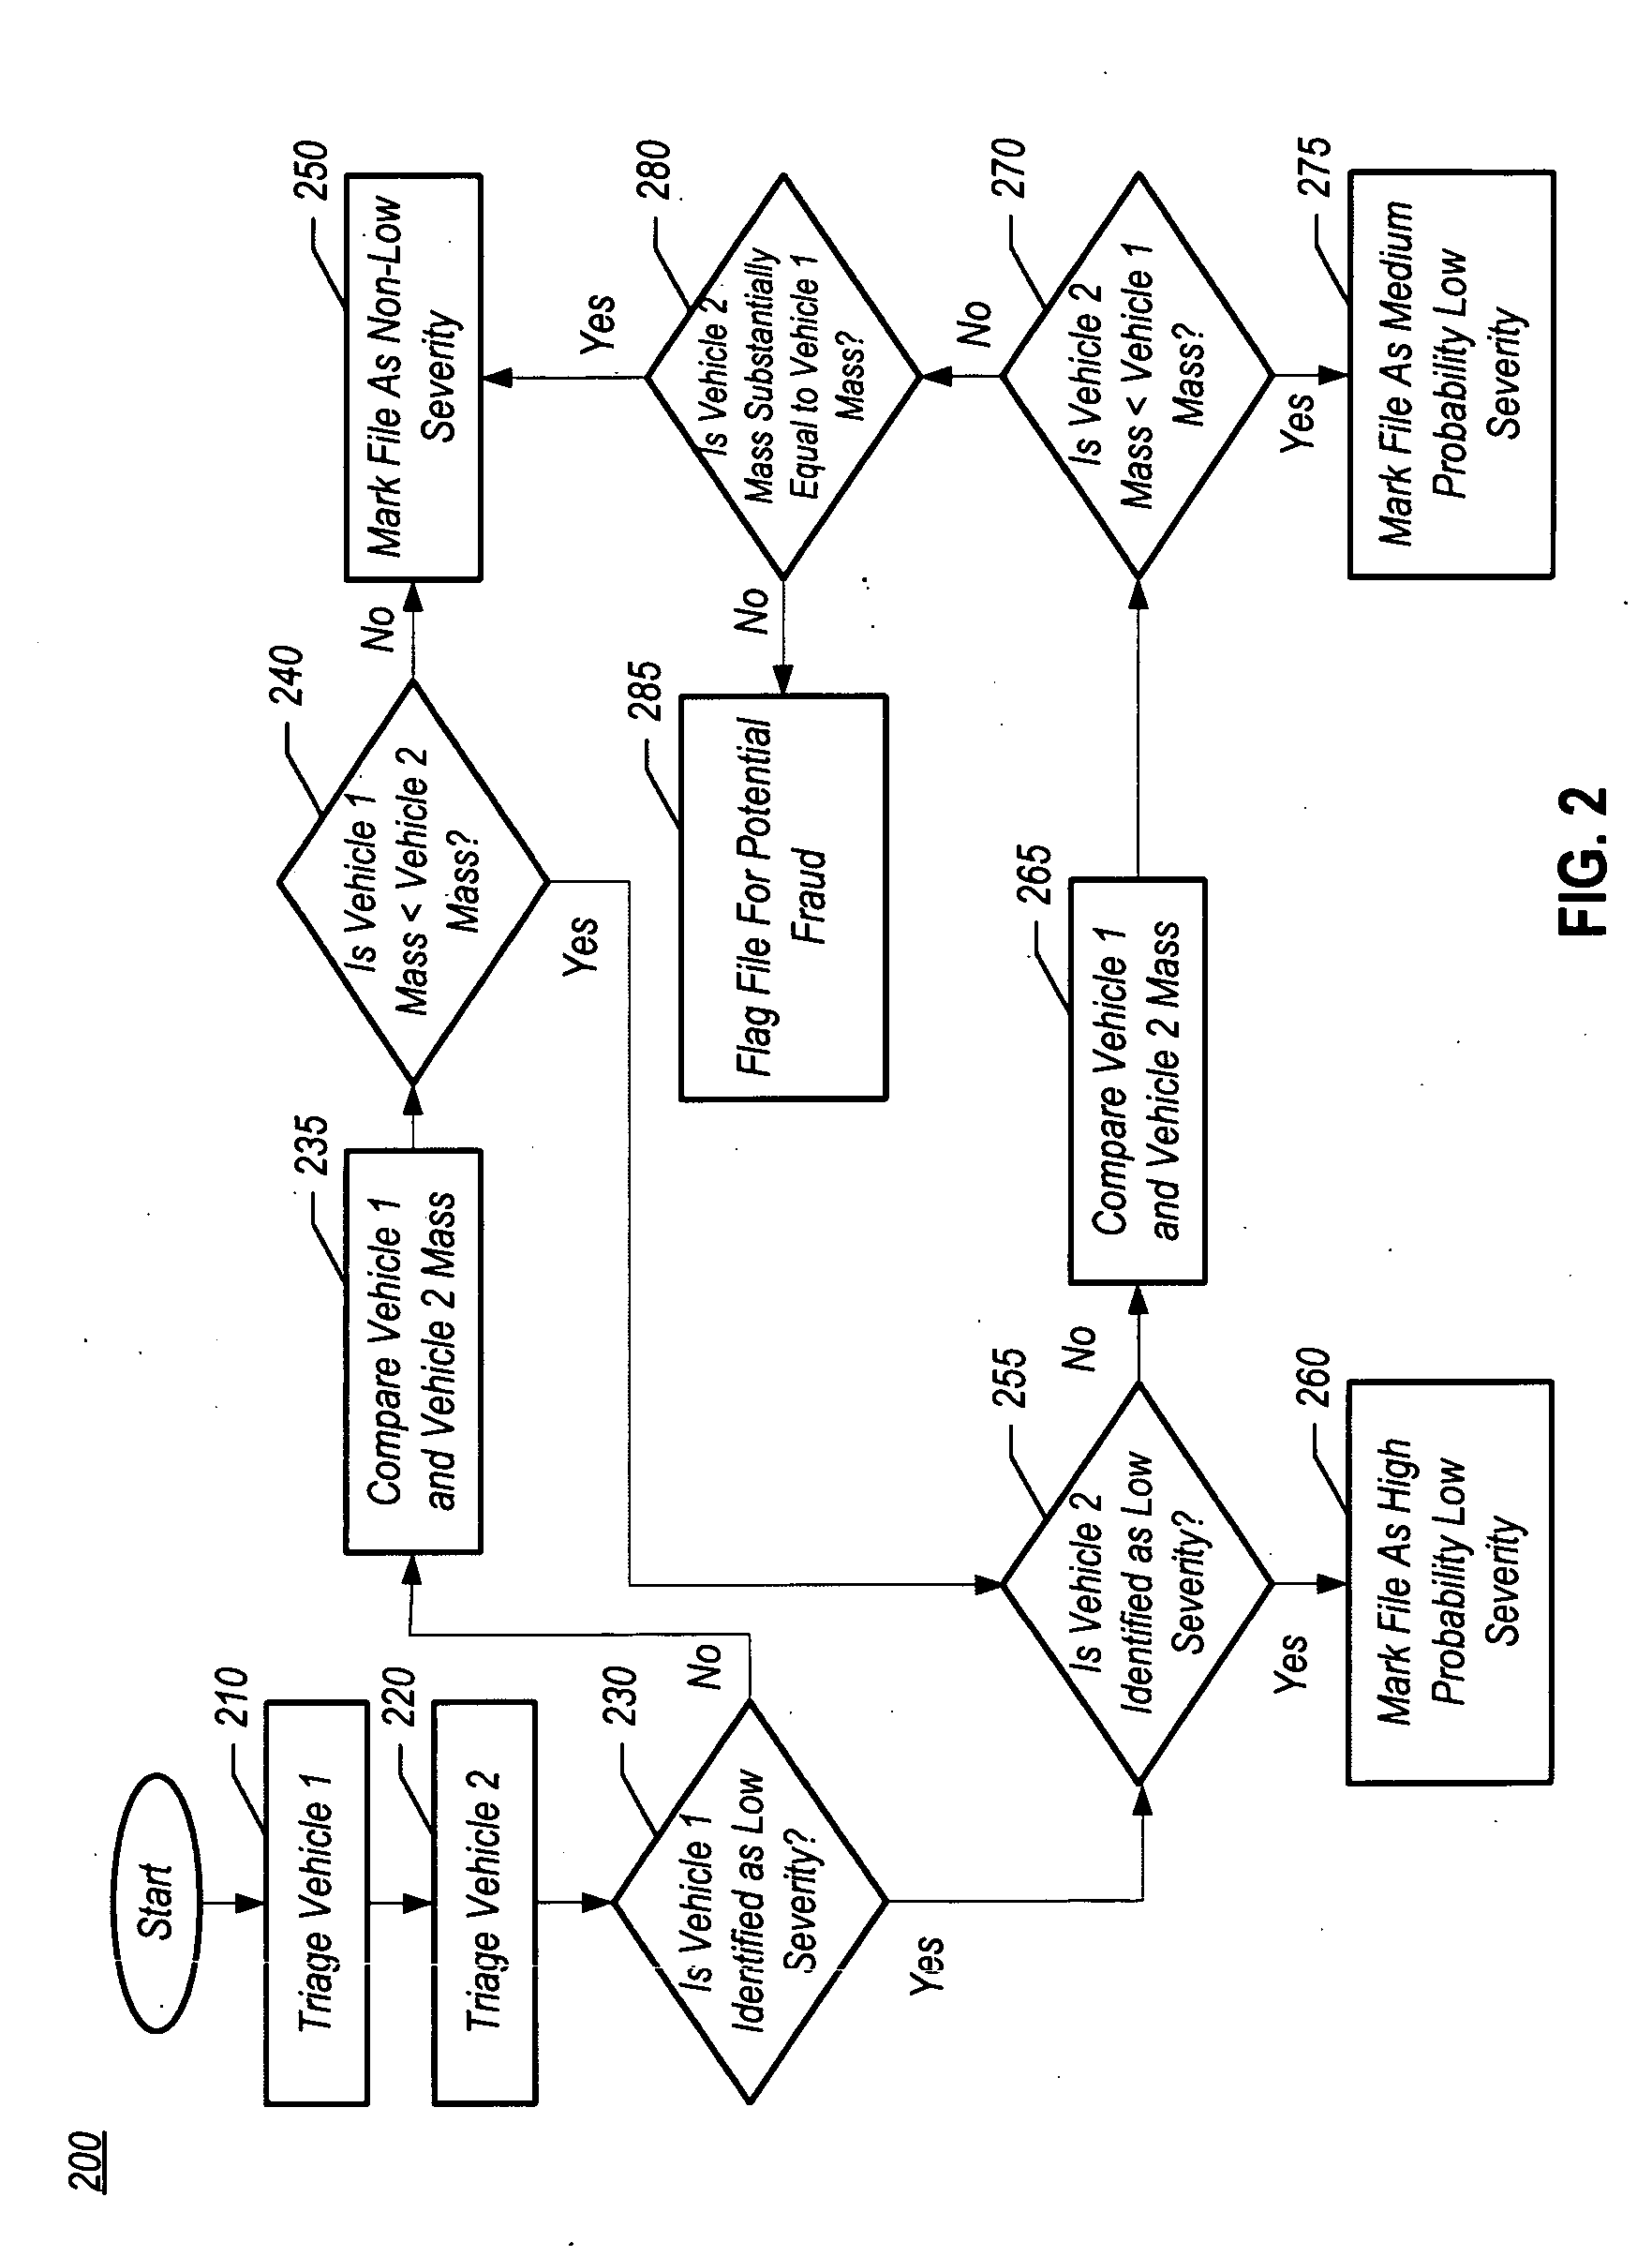 Method and apparatus for obtaining and using impact severity triage data